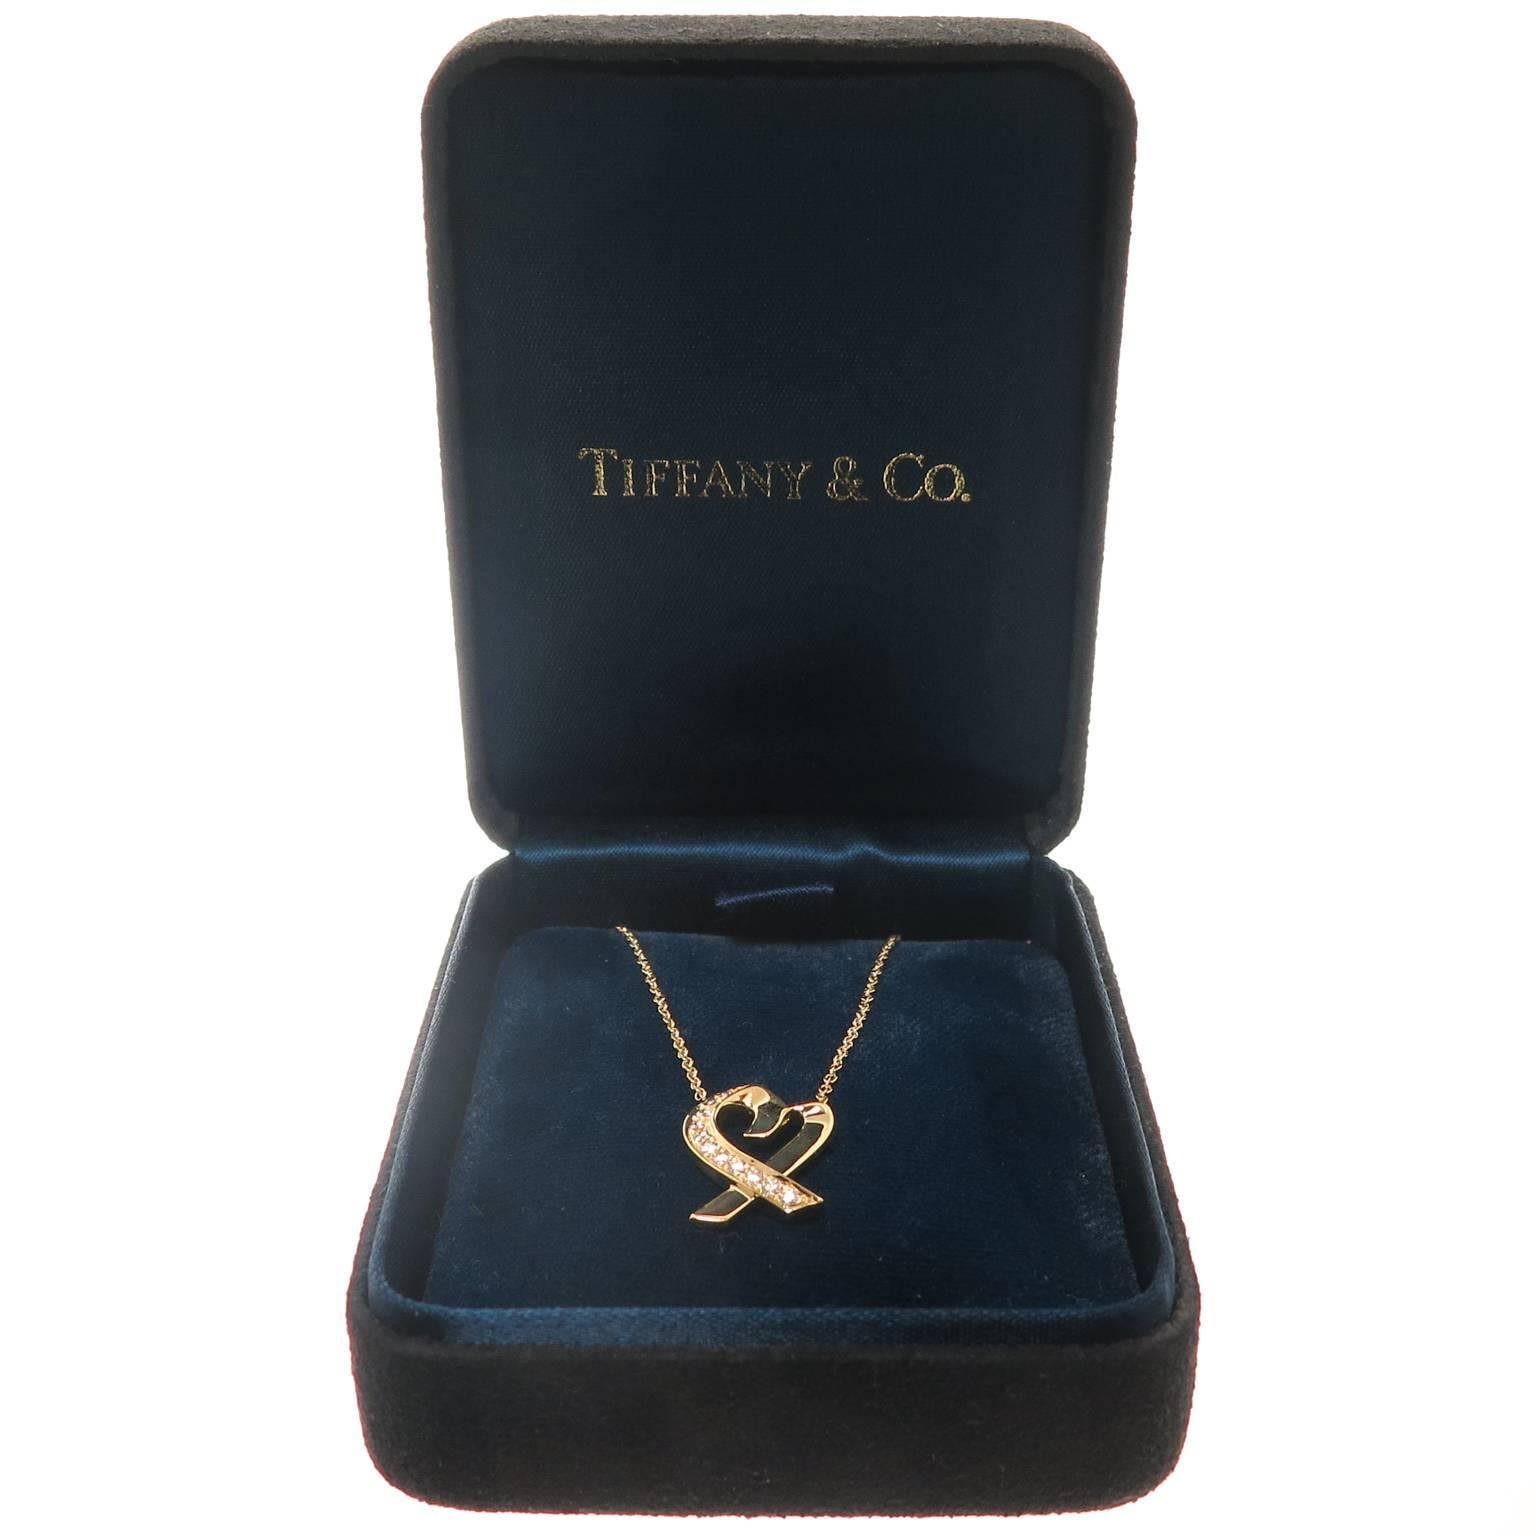 Circa 1990s Paloma Picasso for Tiffany & Company 18K Yellow Gold and Diamond Open heart Pendant Necklace. The Heart Measures 5/8 inch in length and suspended from a16 inch chain. Set with Round Brilliant cut Diamonds totaling .20 Carat. Comes in the